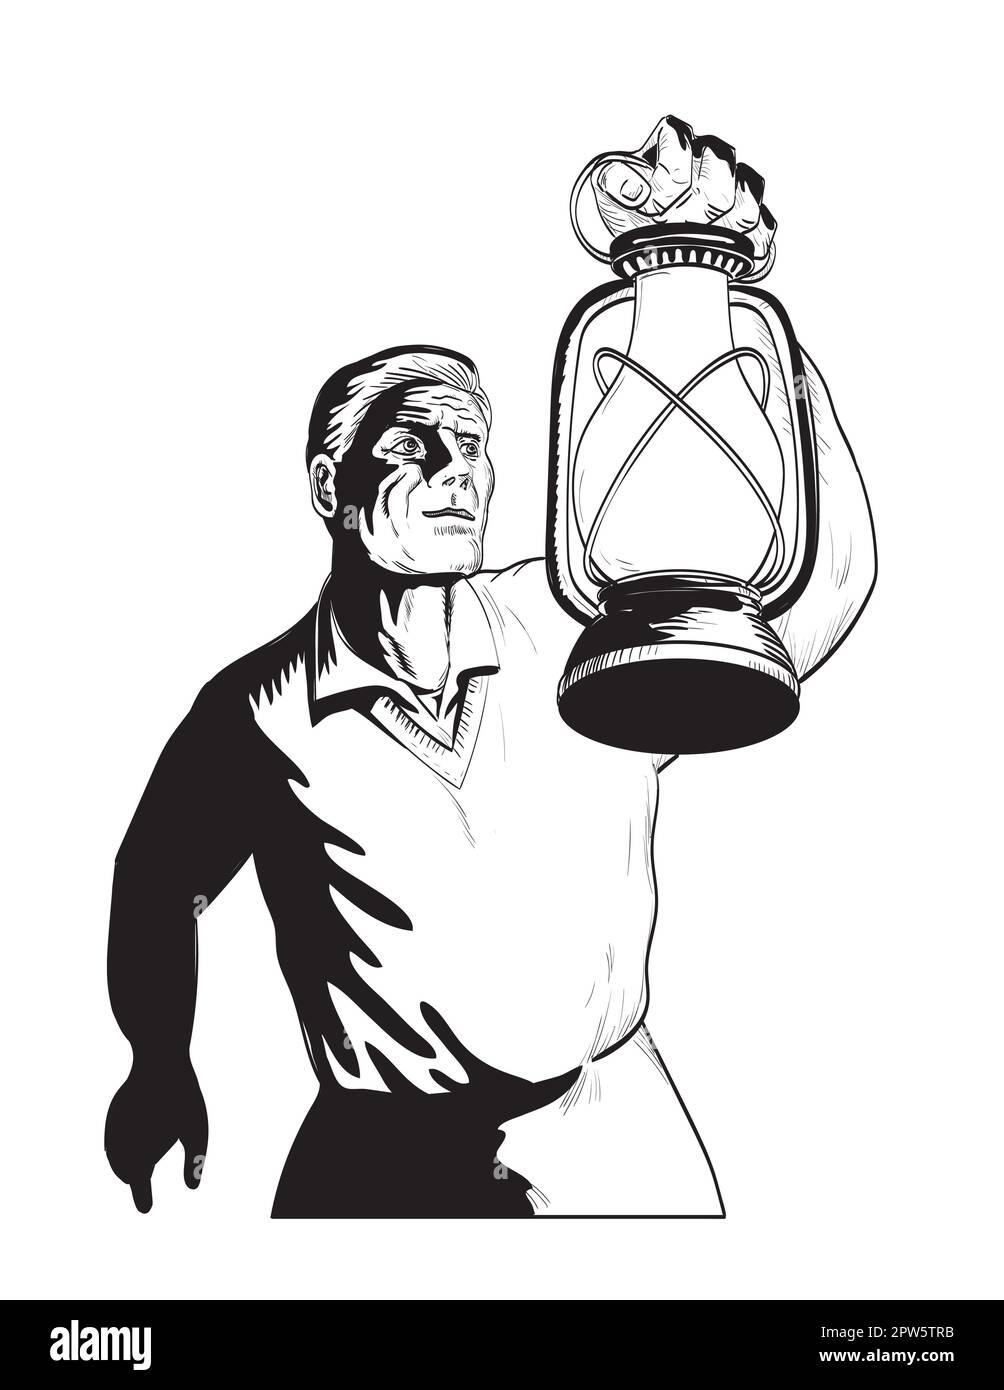 Comics style drawing or illustration of a man holding a farmer's light up lantern or kerosene lamp viewed from low angle on isolated background in bla Stock Photo